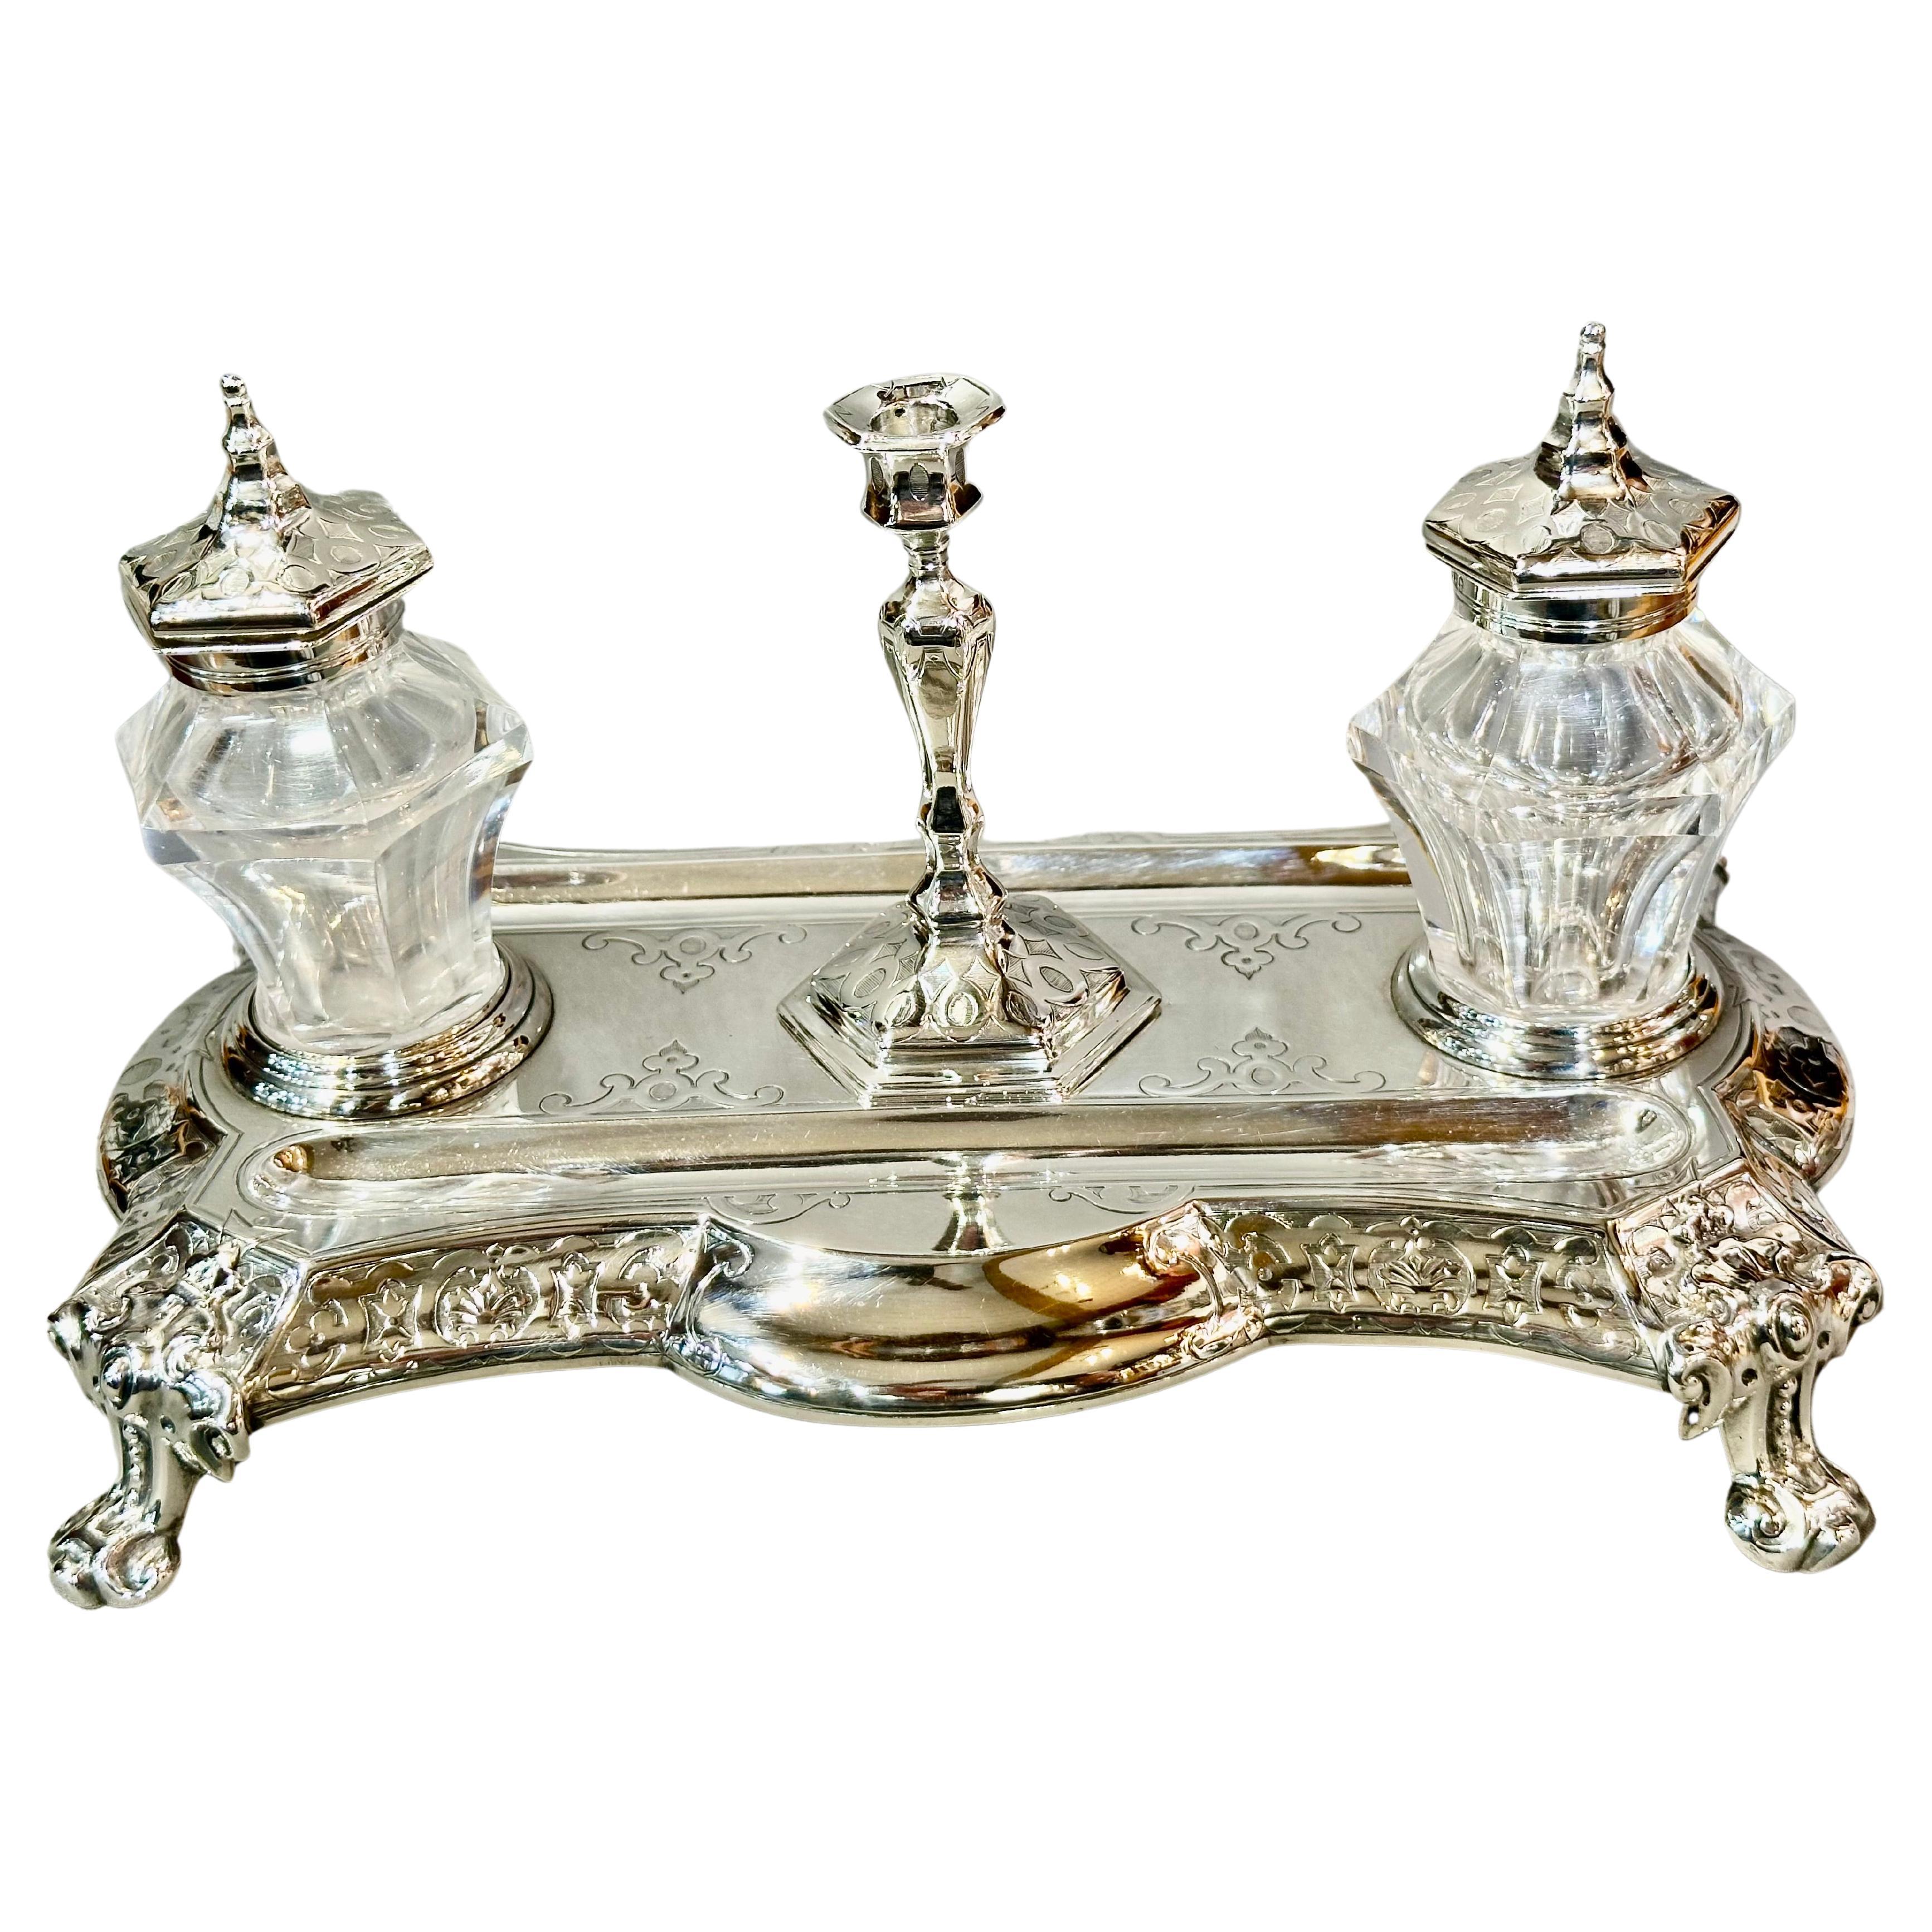  George Richards & Edward Brown English Sterling Silver Glass Inkstand 1862